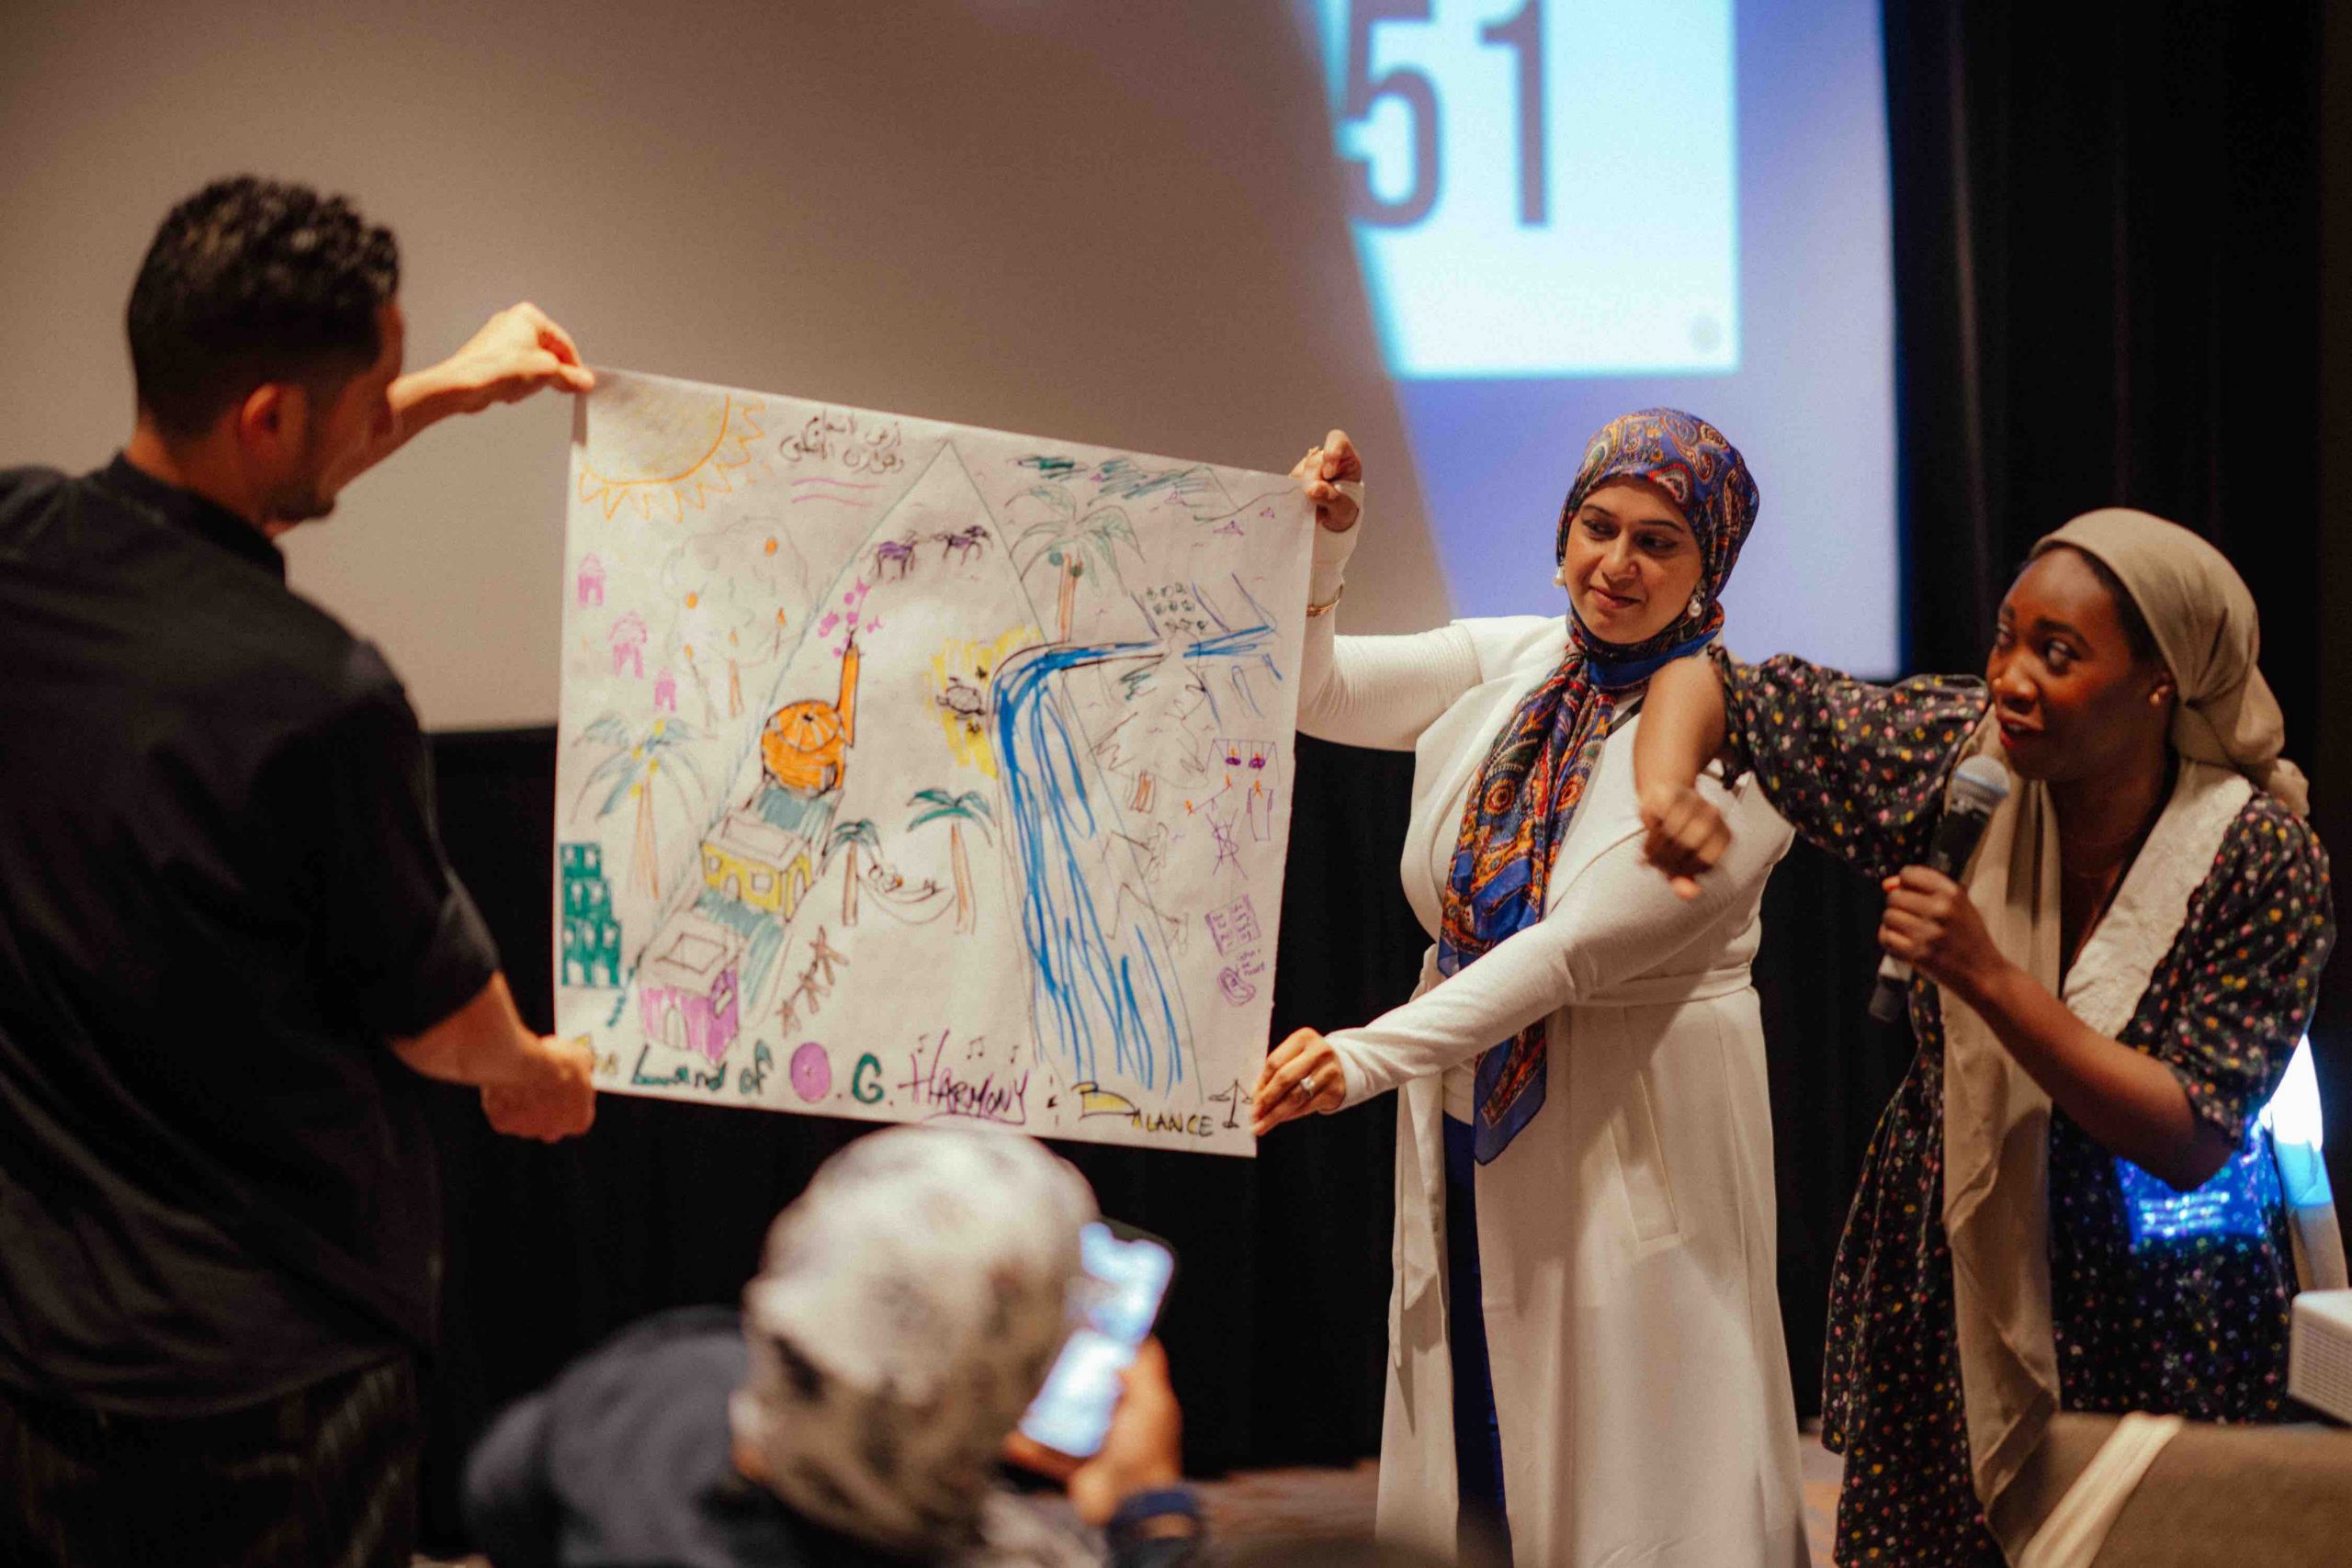 A group of convening attendees holds up a large white piece of paper filled with hand illustrated drawings